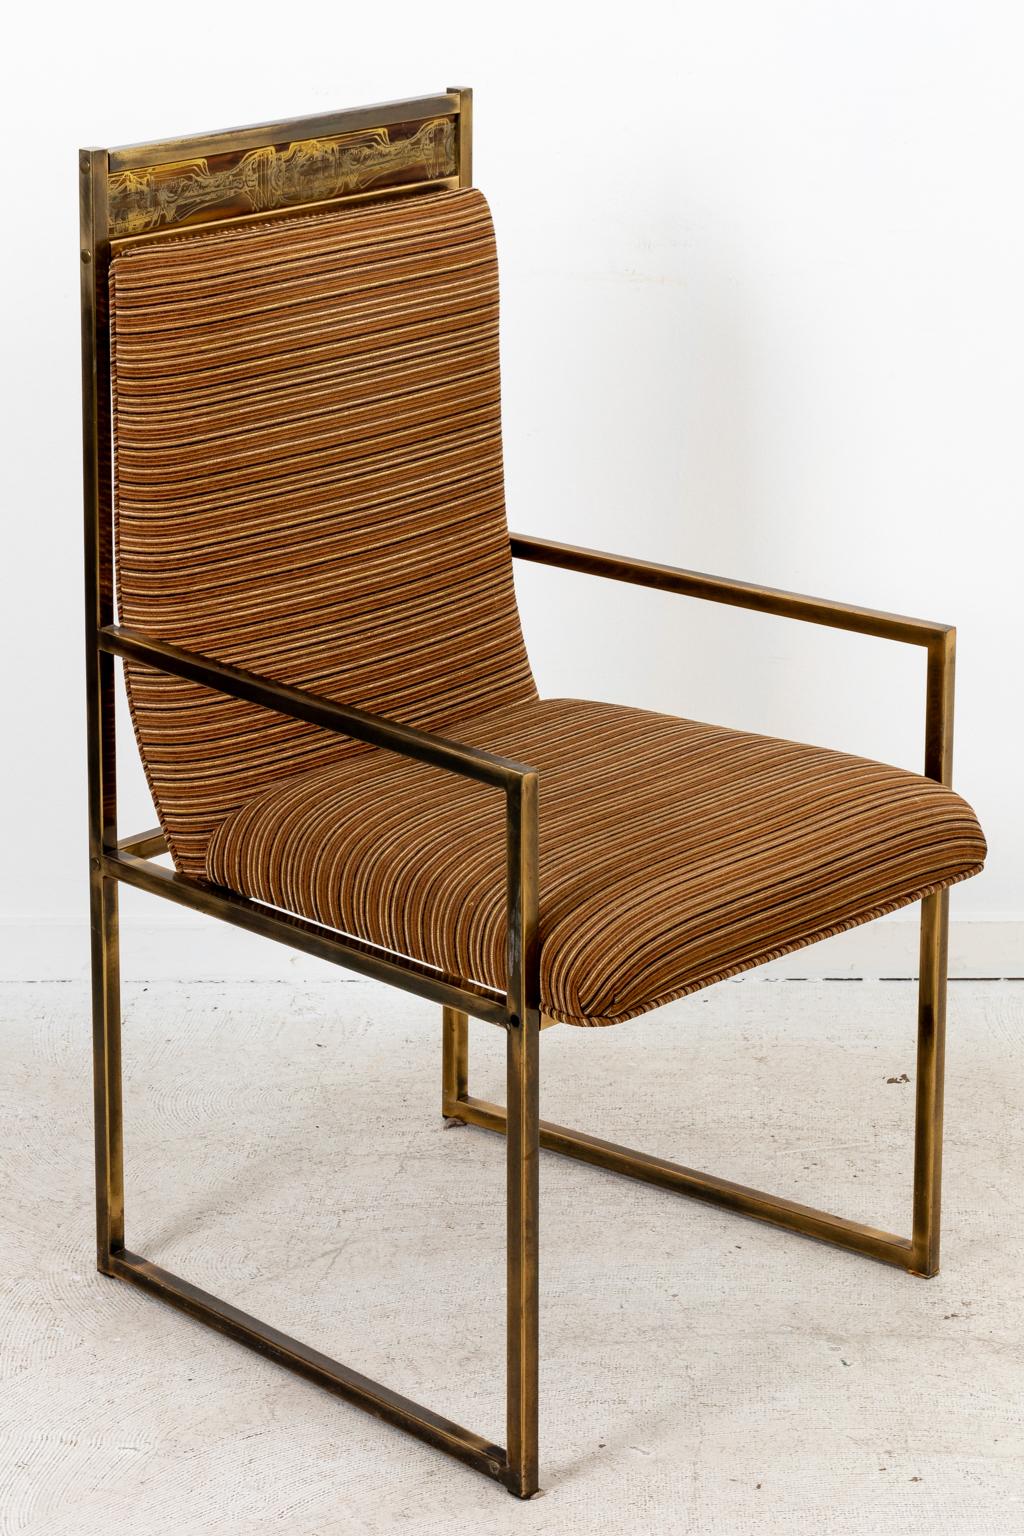 Circa 1910s six brass Mastercraft dining chairs with acid etched bronze panels by Bernhard Rohne with upholstered seats and backs. The upholstery is in excellent condition. Made in the United States. Please note of wear consistent with age.